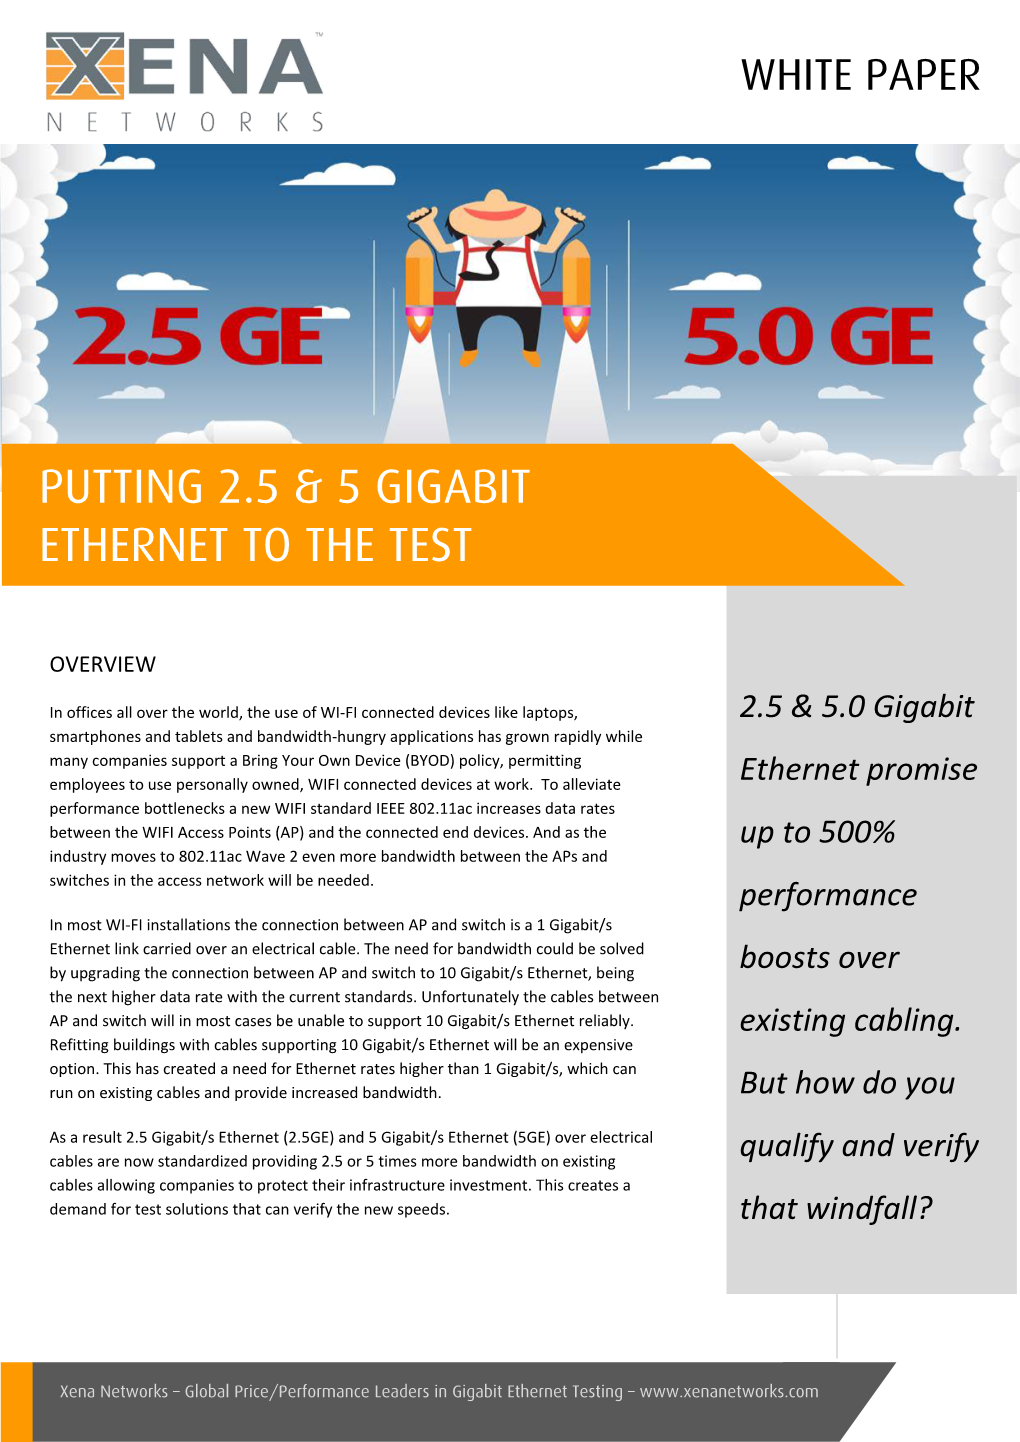 Putting 2.5 & 5 Gigabit Ethernet to the Test